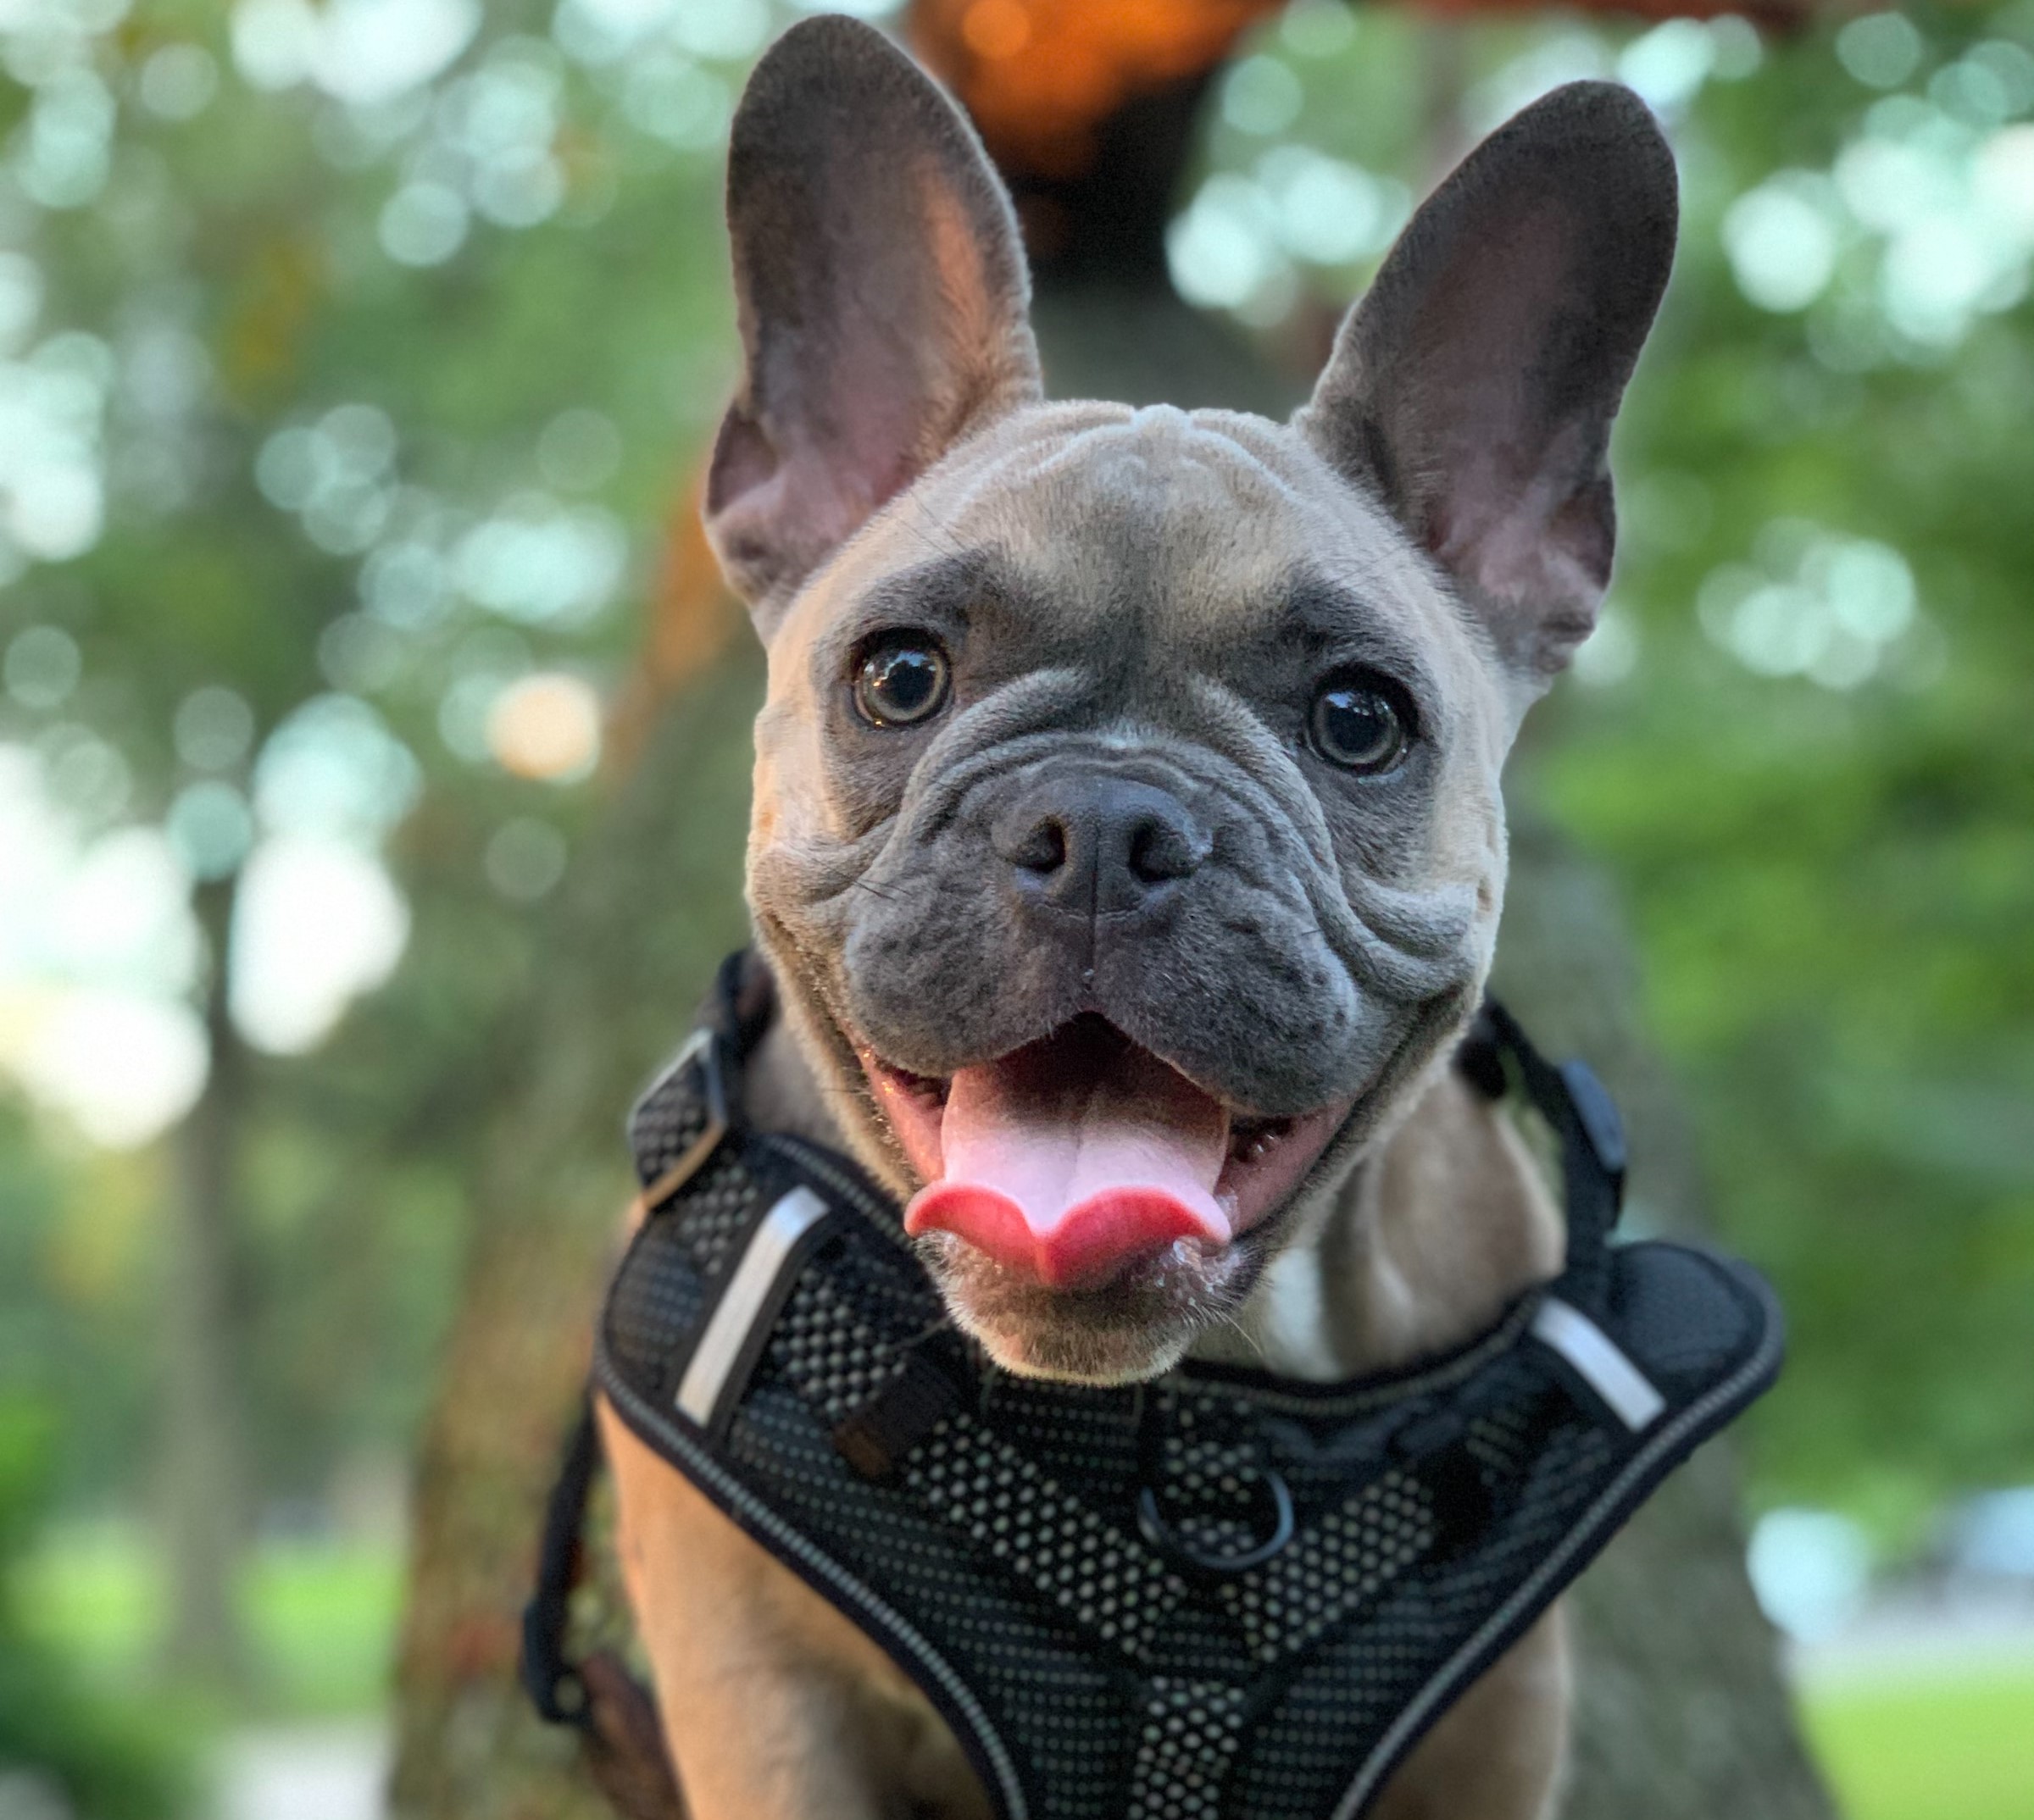 A French Bulldog being photographed climbing a tree